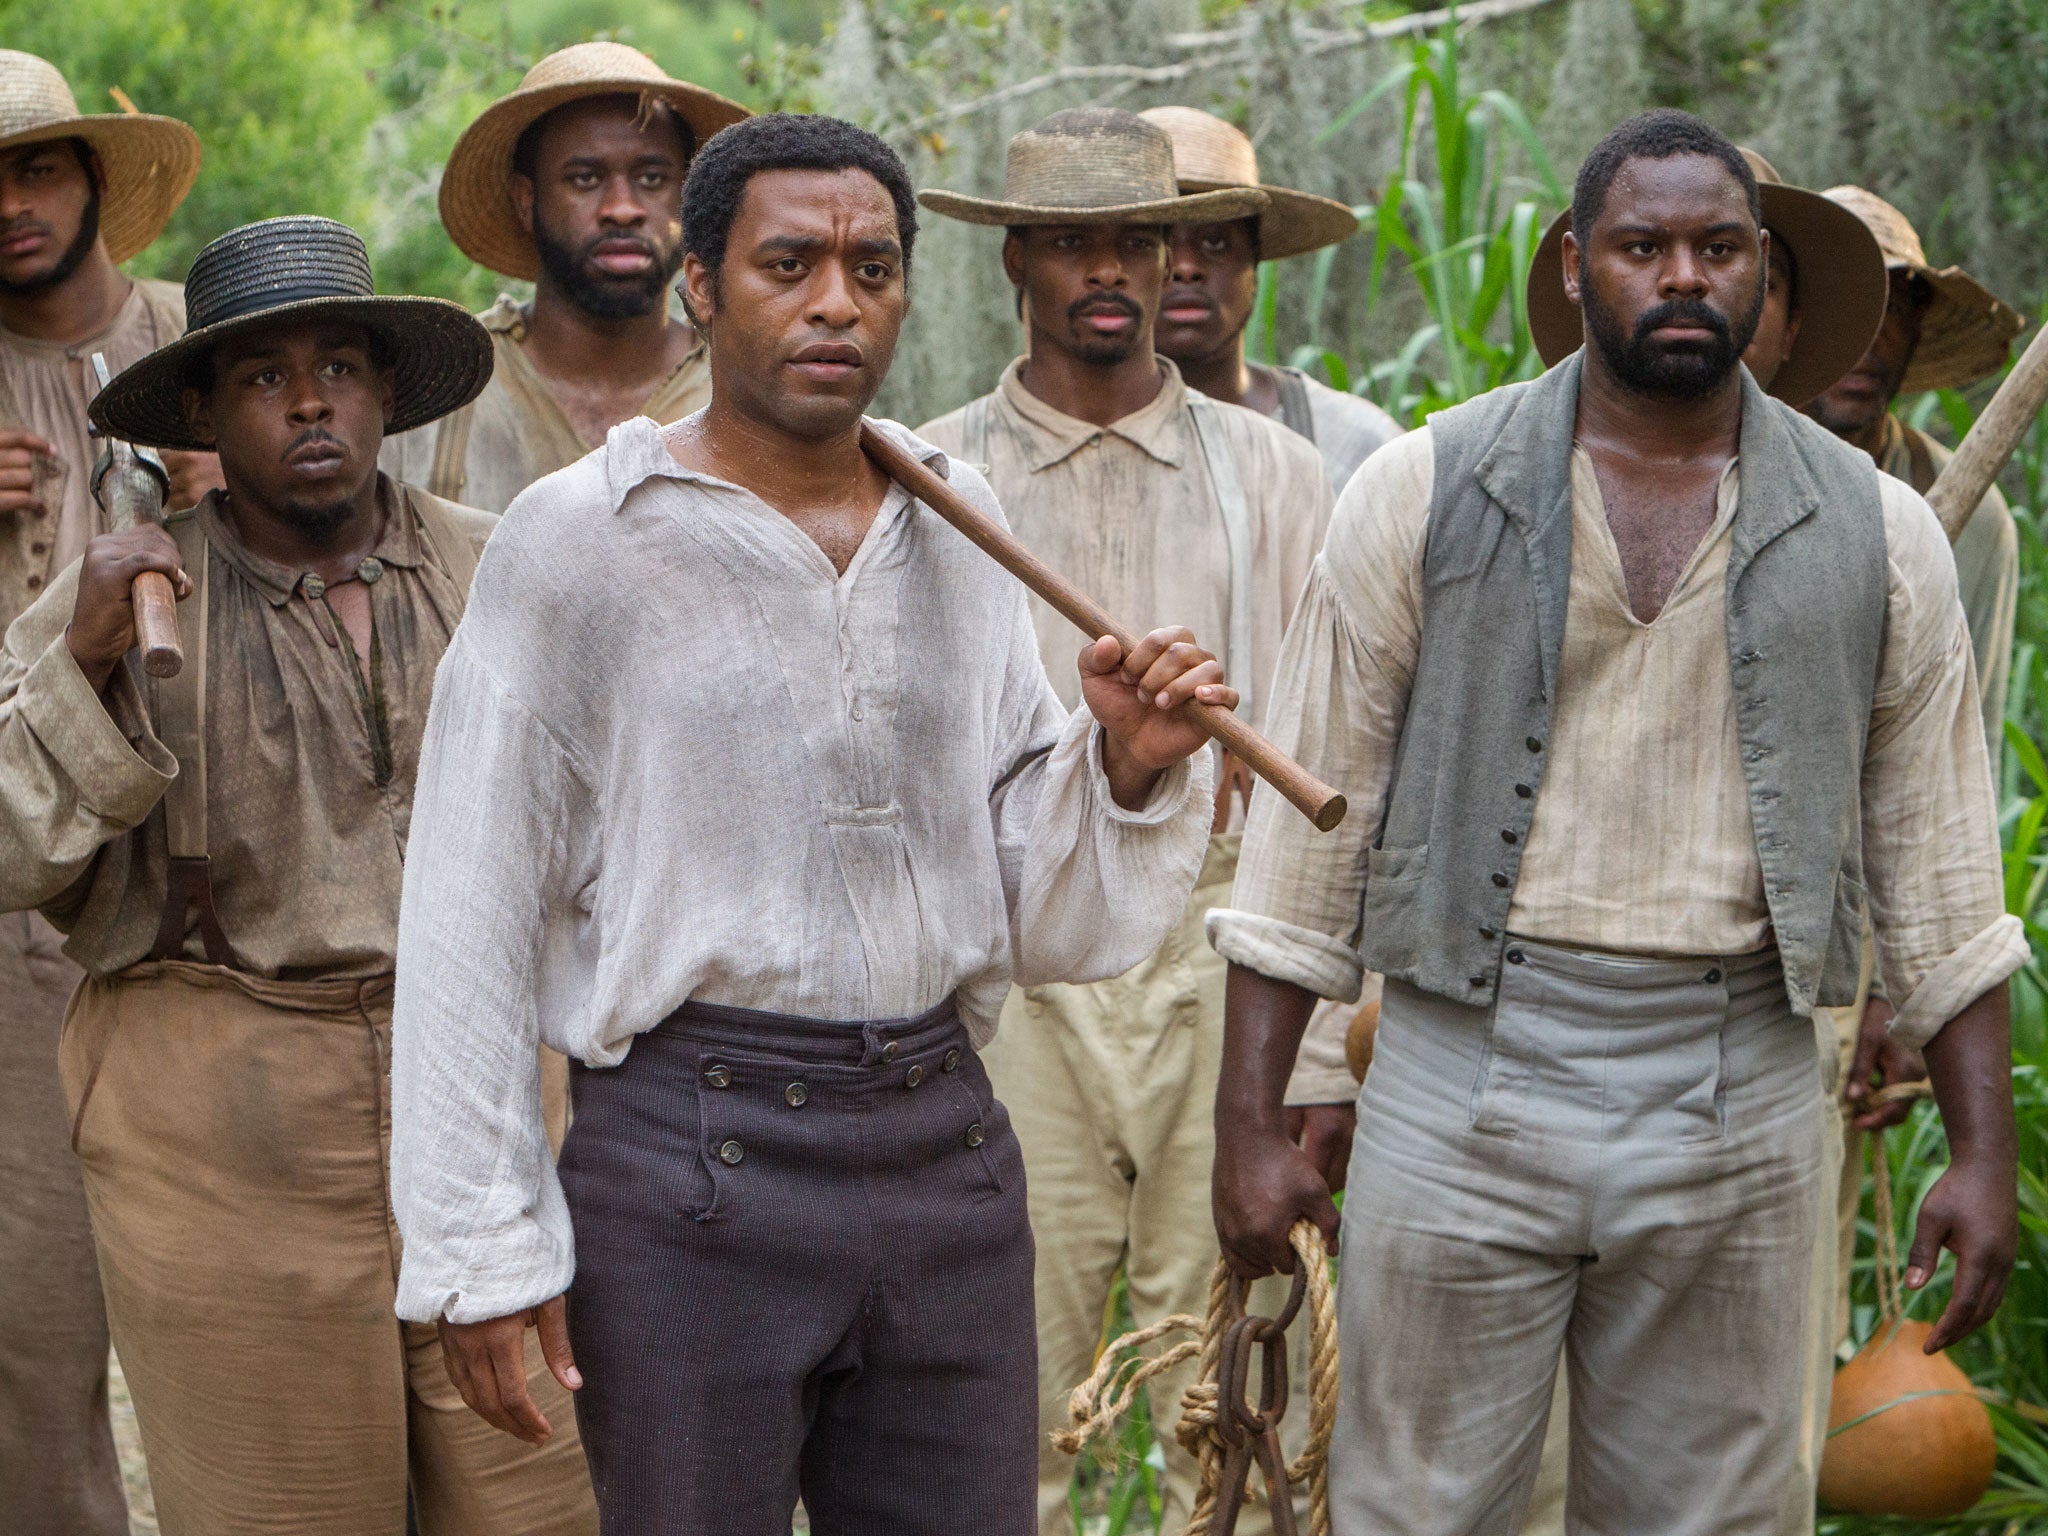 12 Years A Slave will be shown to Indian audiences without edits after the censor board allowed full-frontal nudity shots to remain